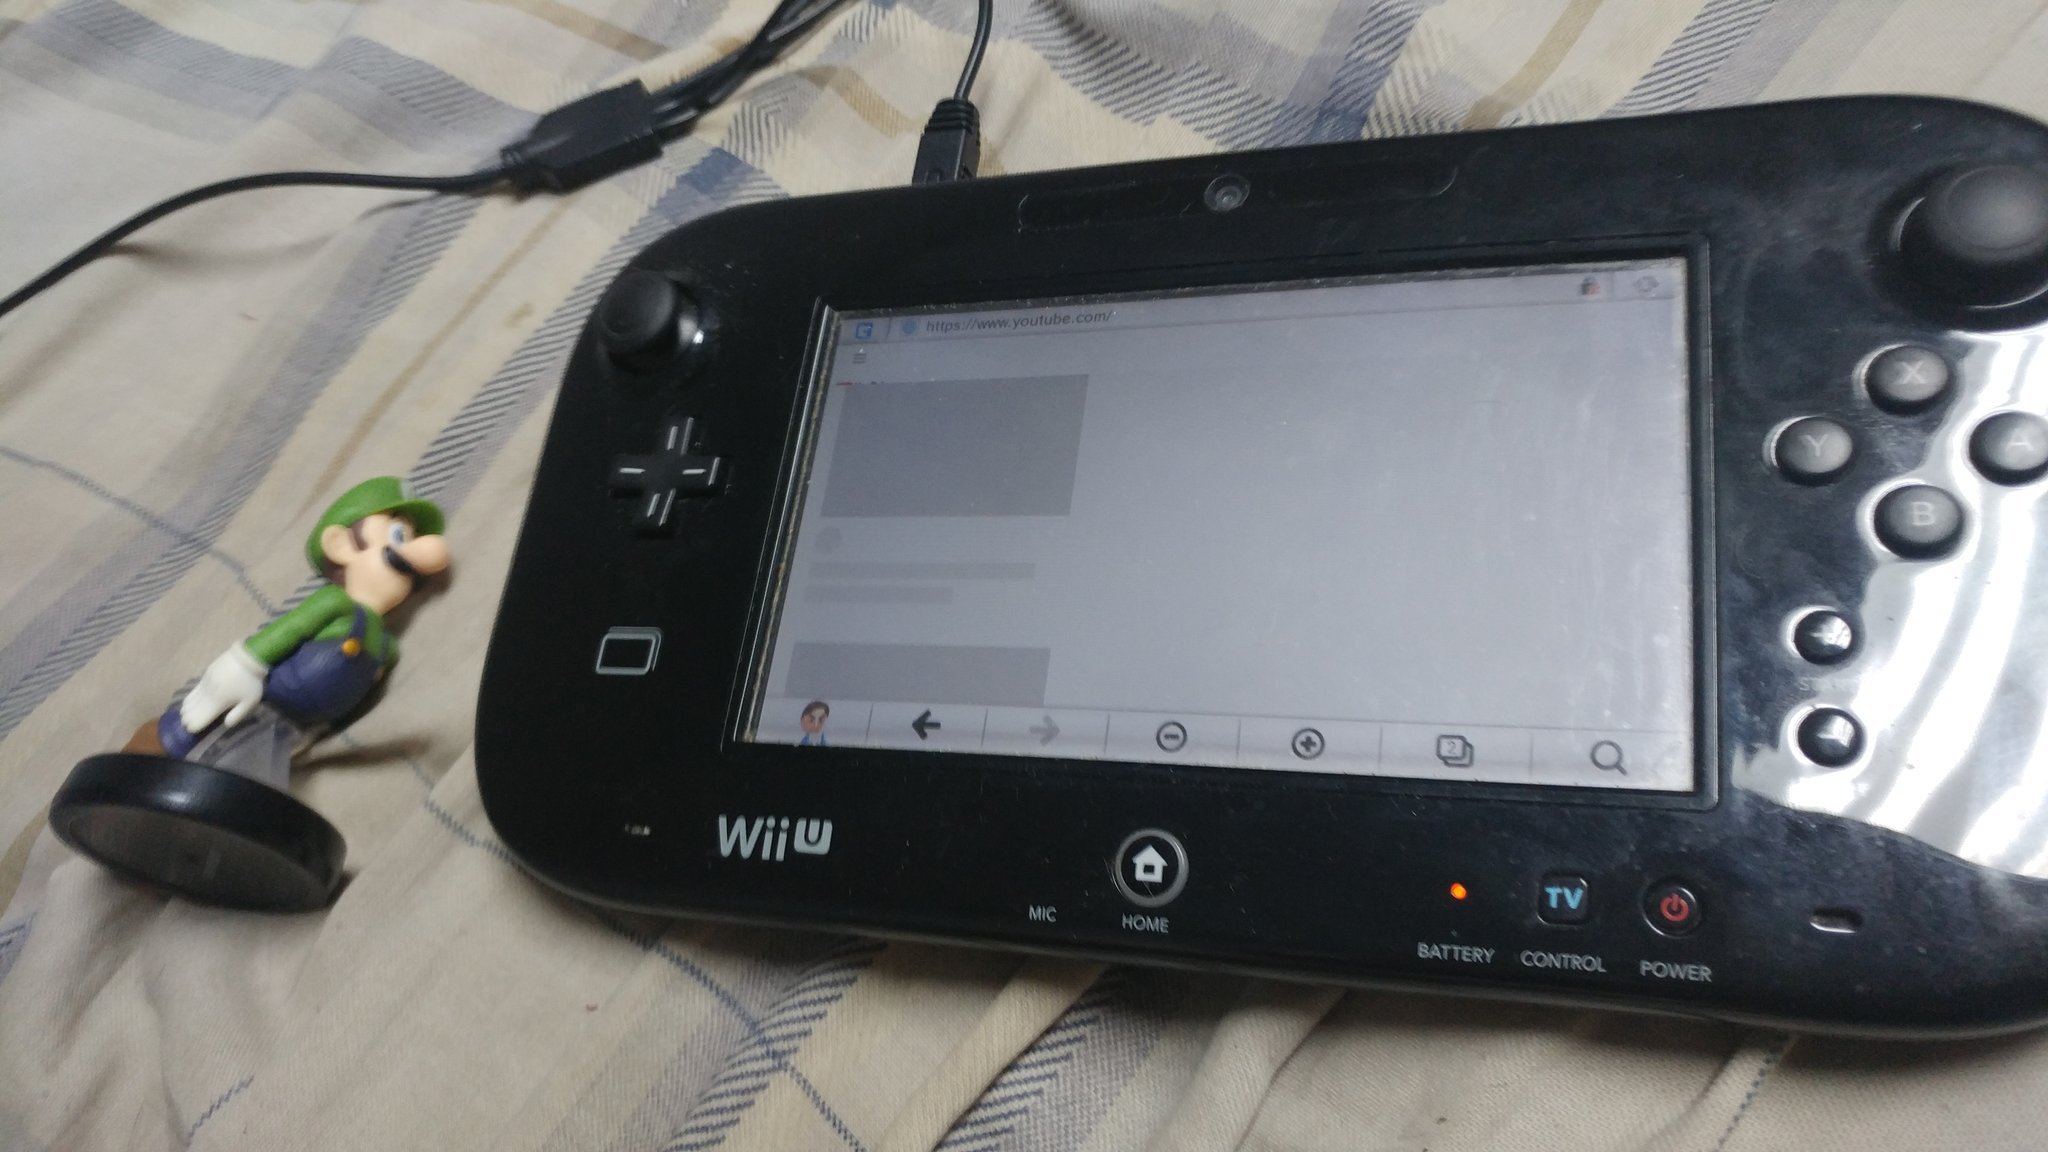 Youtube Doesn T Seem To Work In The Wii U Browser Anymore